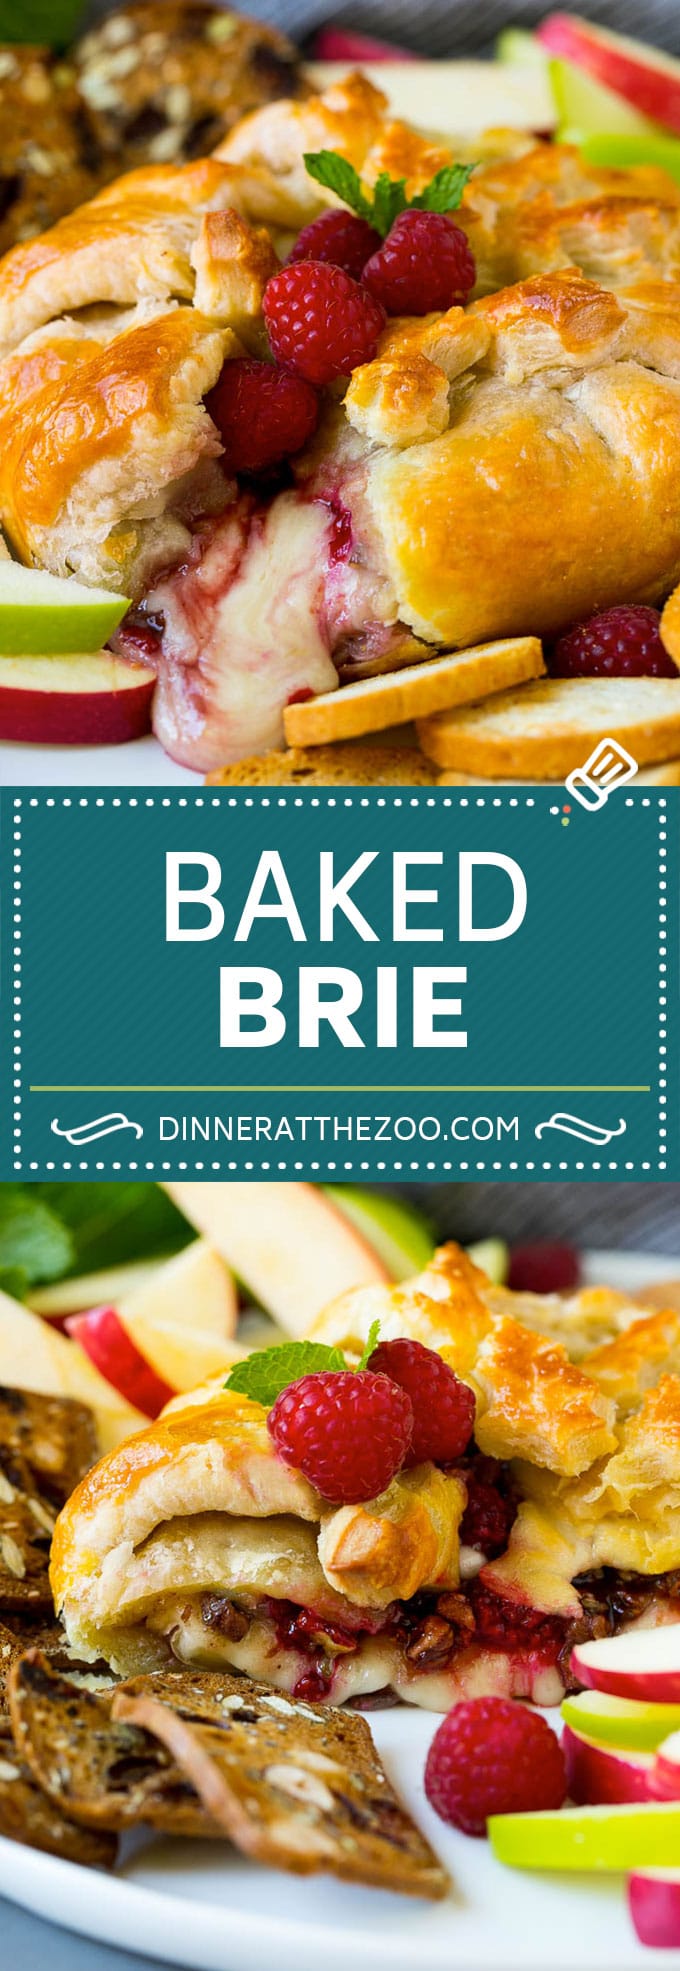 Baked Brie Recipe | Pastry Wrapped Brie #brie #cheese #appetizer #pecans #raspberries #dinneratthezoo